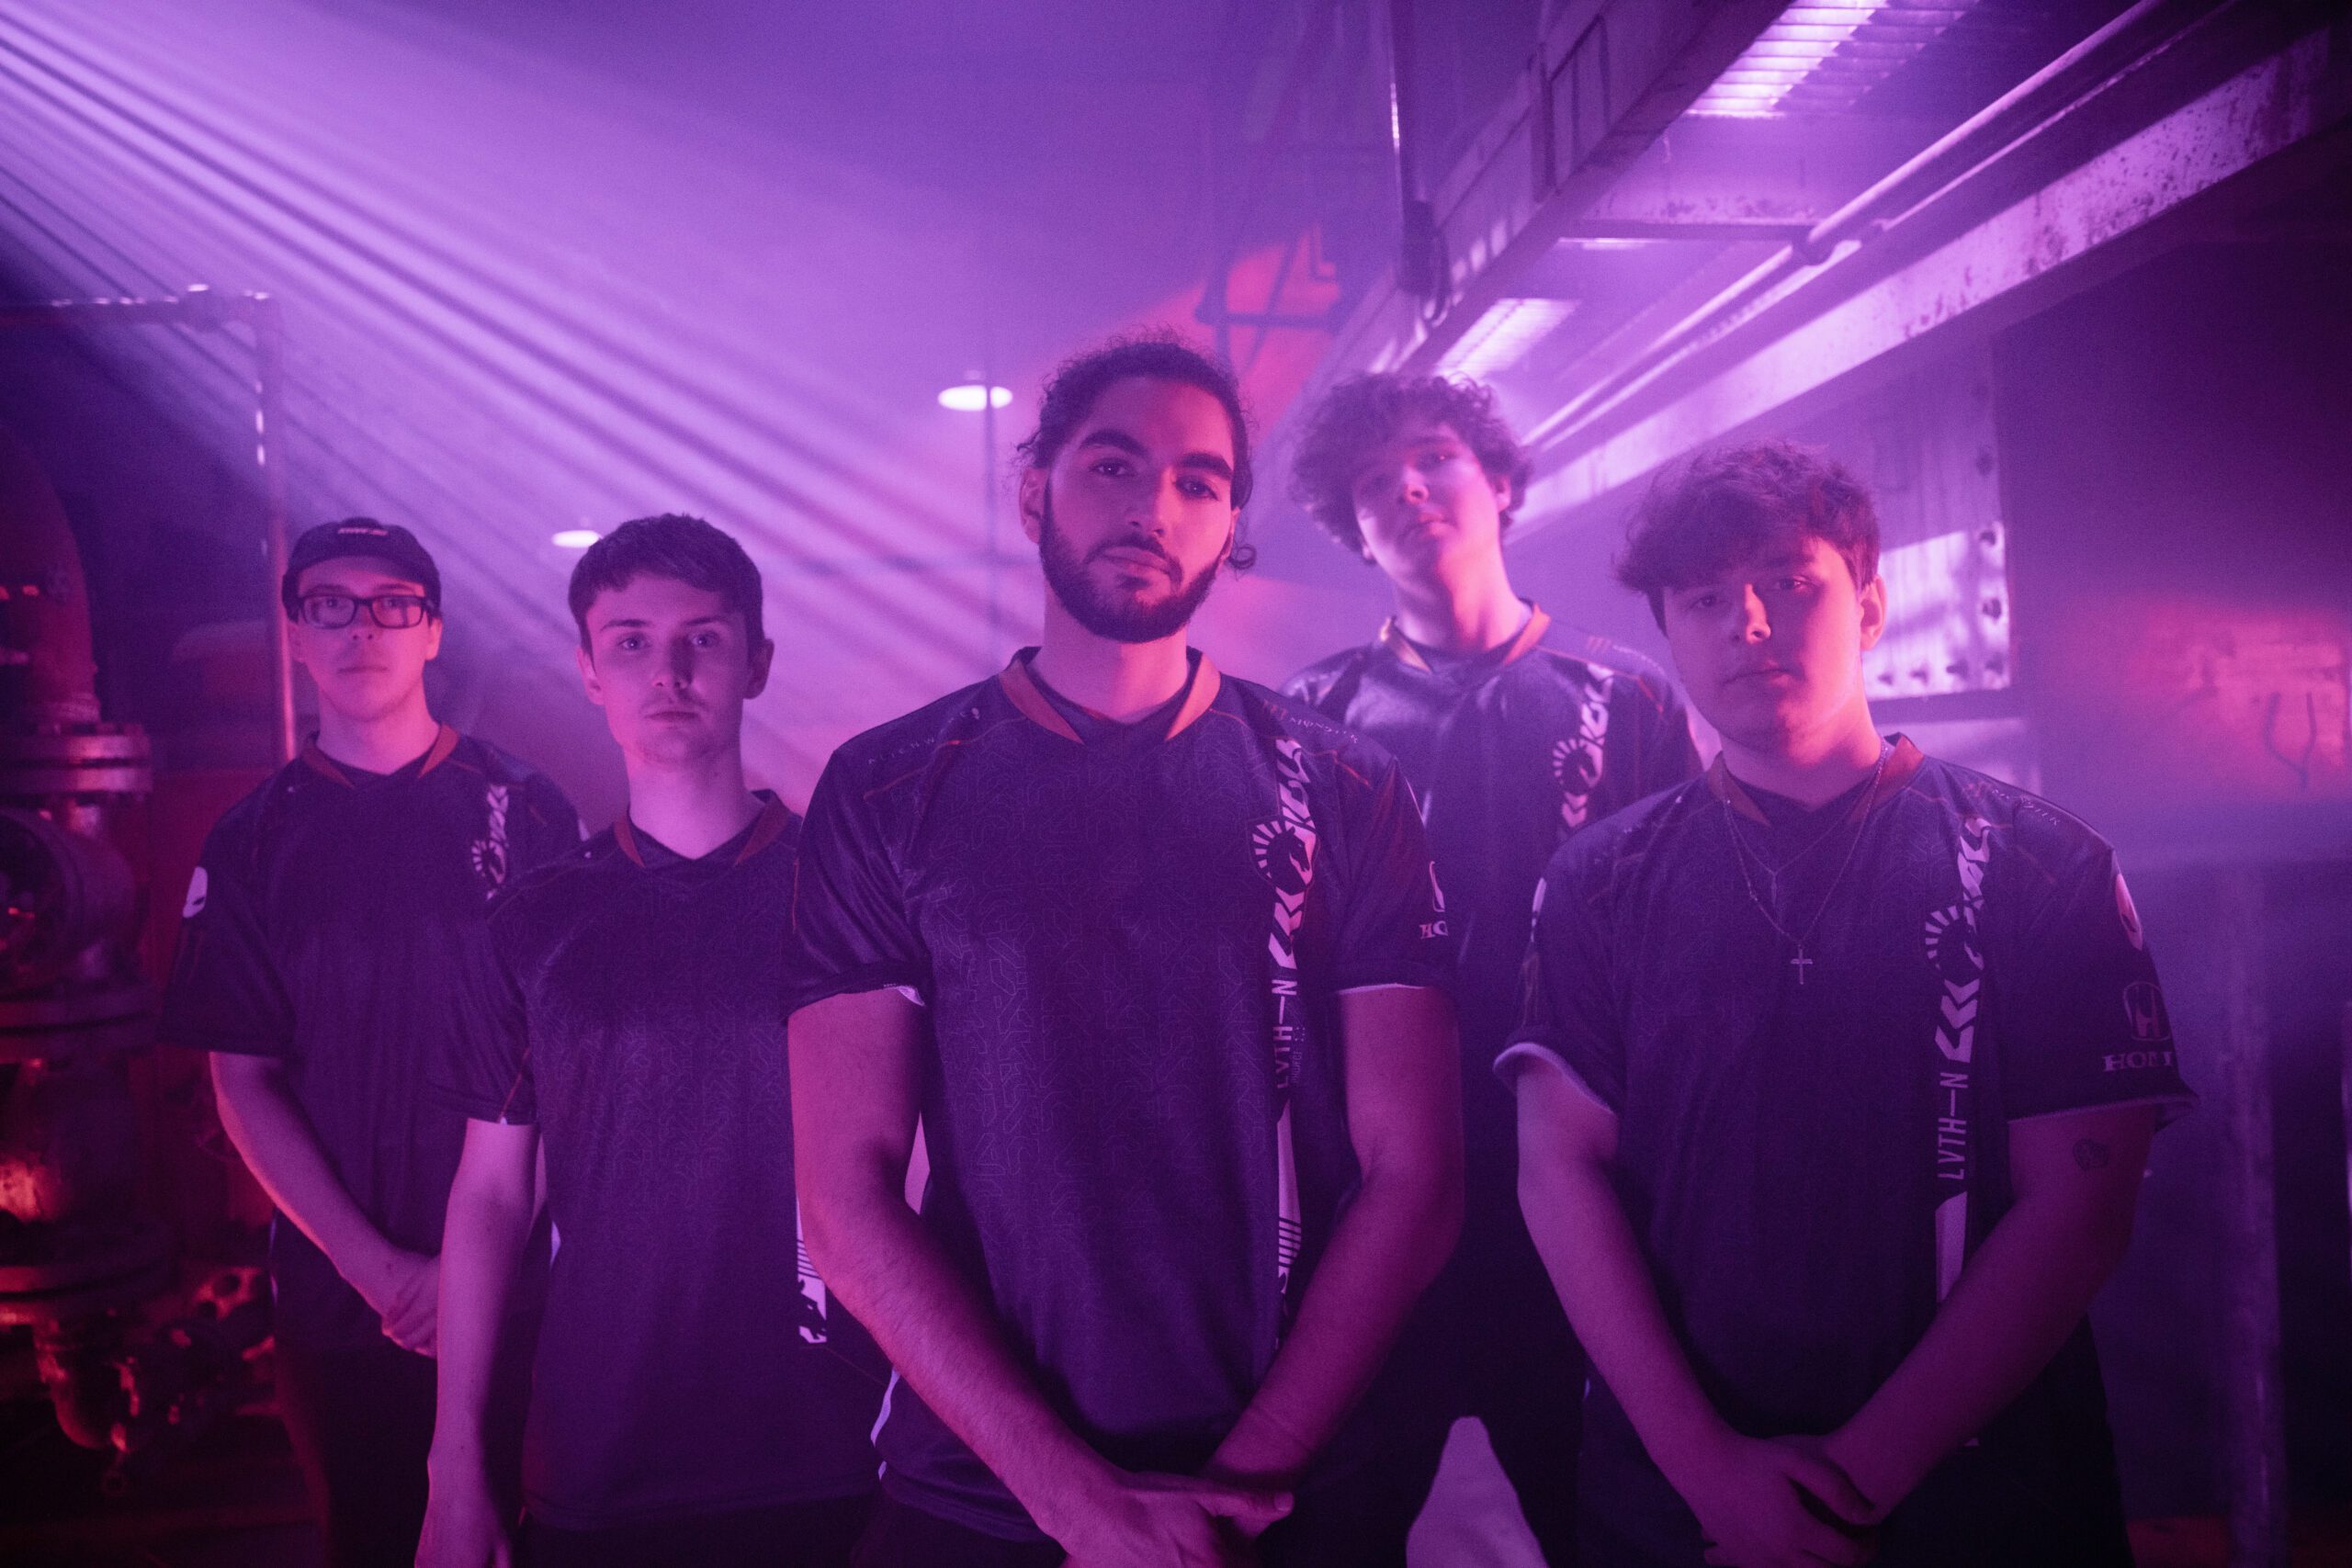 Team Liquid poses at for the camera during the Stage 2 VALORANT Champions Tour at Reykjavik, Iceland | Photo by Colin Young-Wolff/Riot Games